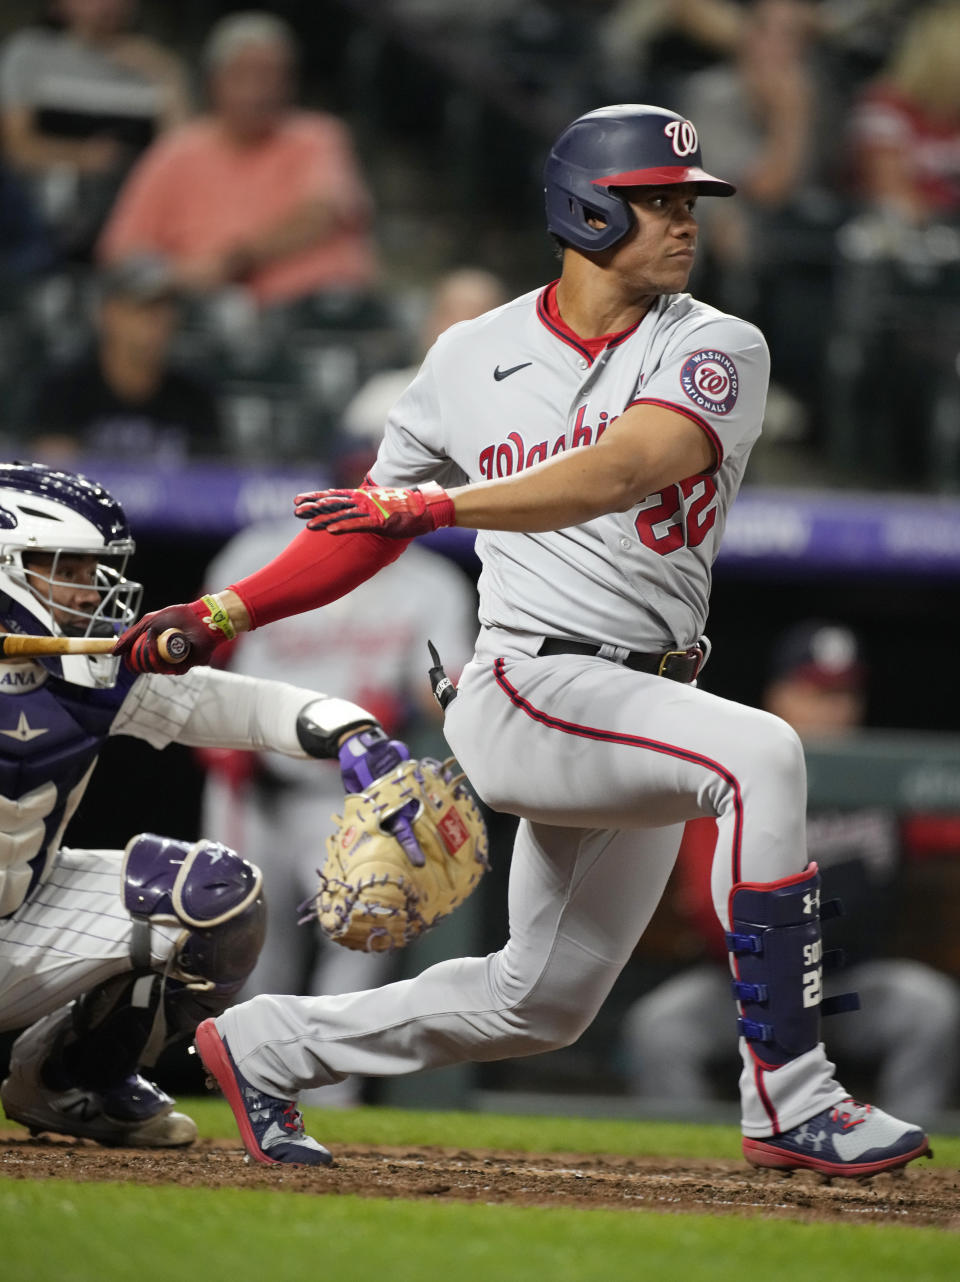 Washington Nationals' Juan Soto hits into a force play but drives in a run against Colorado Rockies starting pitcher German Marquez in the fifth inning of a baseball game Monday, Sept. 27, 2021, in Denver. (AP Photo/David Zalubowski)